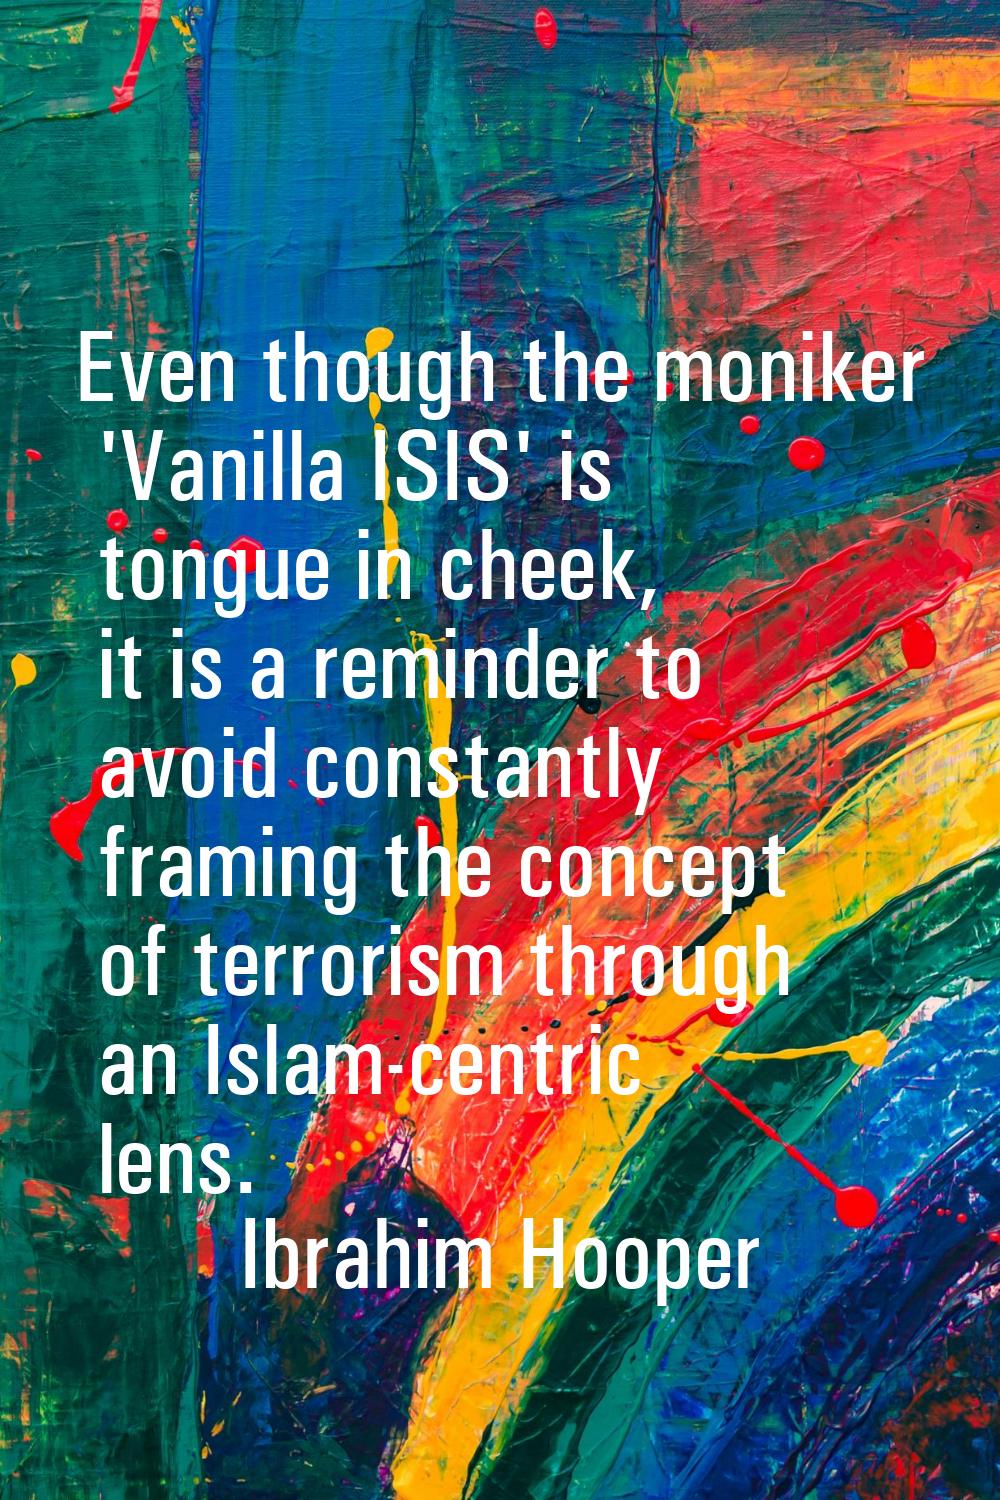 Even though the moniker 'Vanilla ISIS' is tongue in cheek, it is a reminder to avoid constantly fra